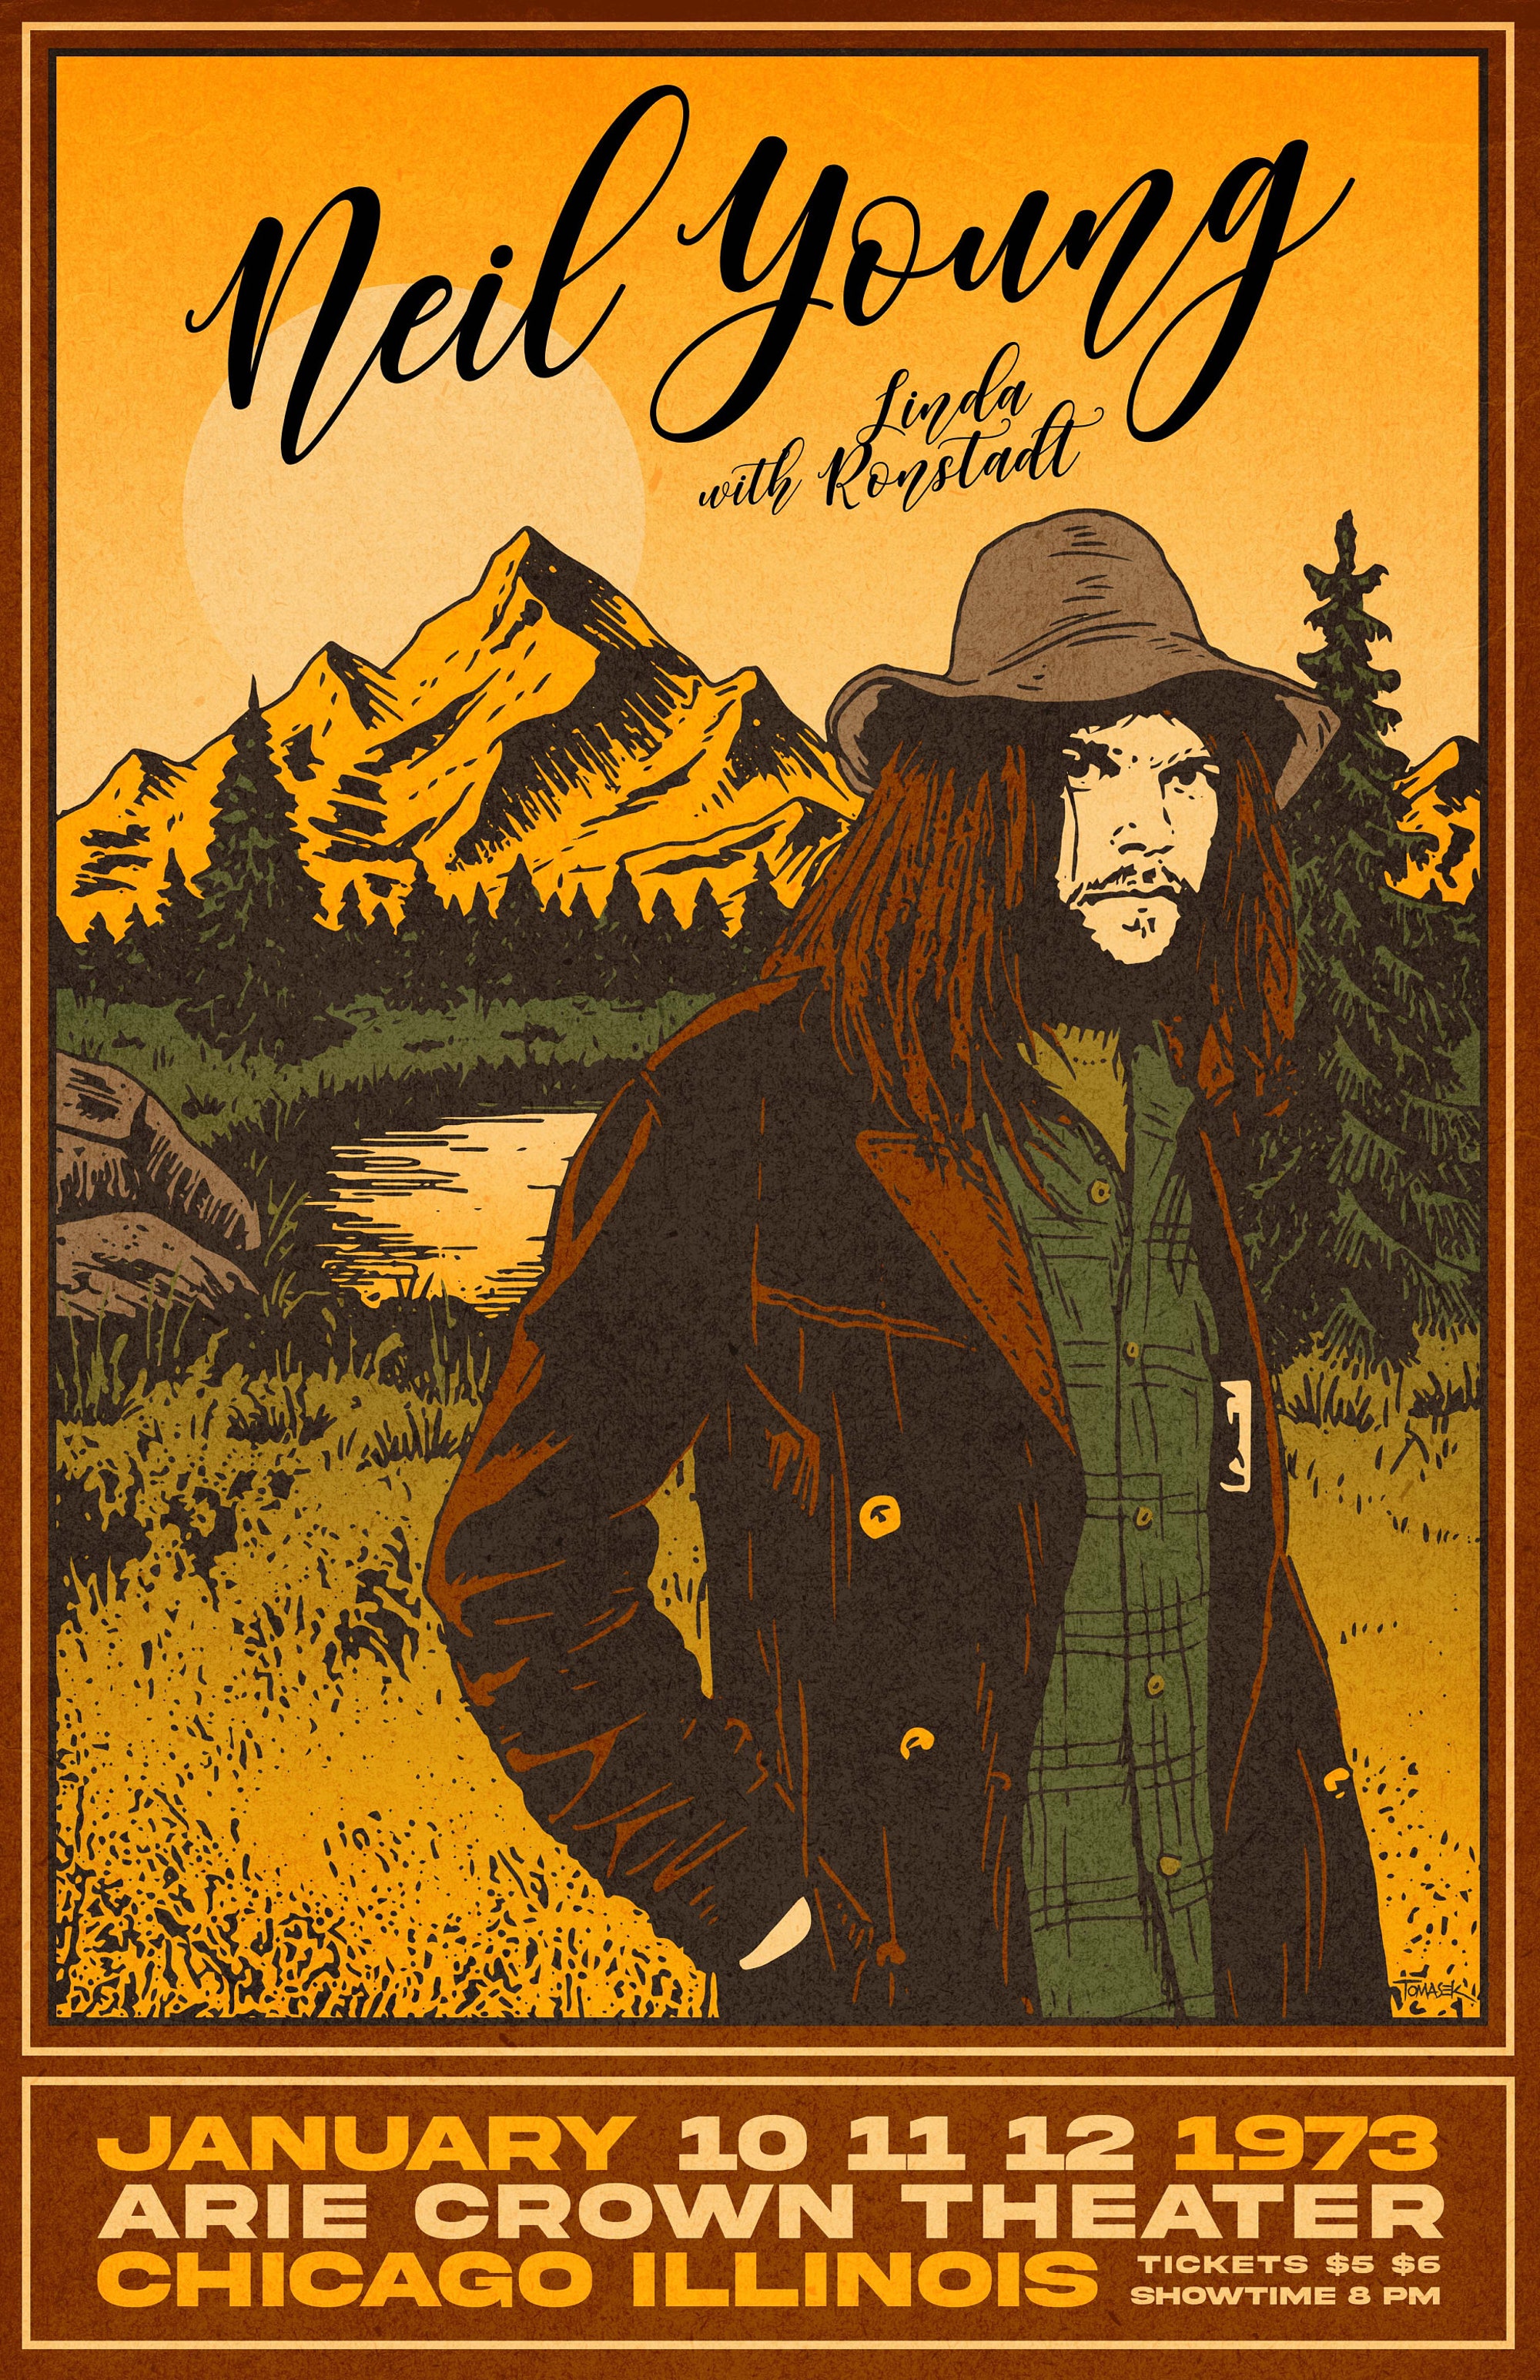 Neil Young 1973 Tour Poster